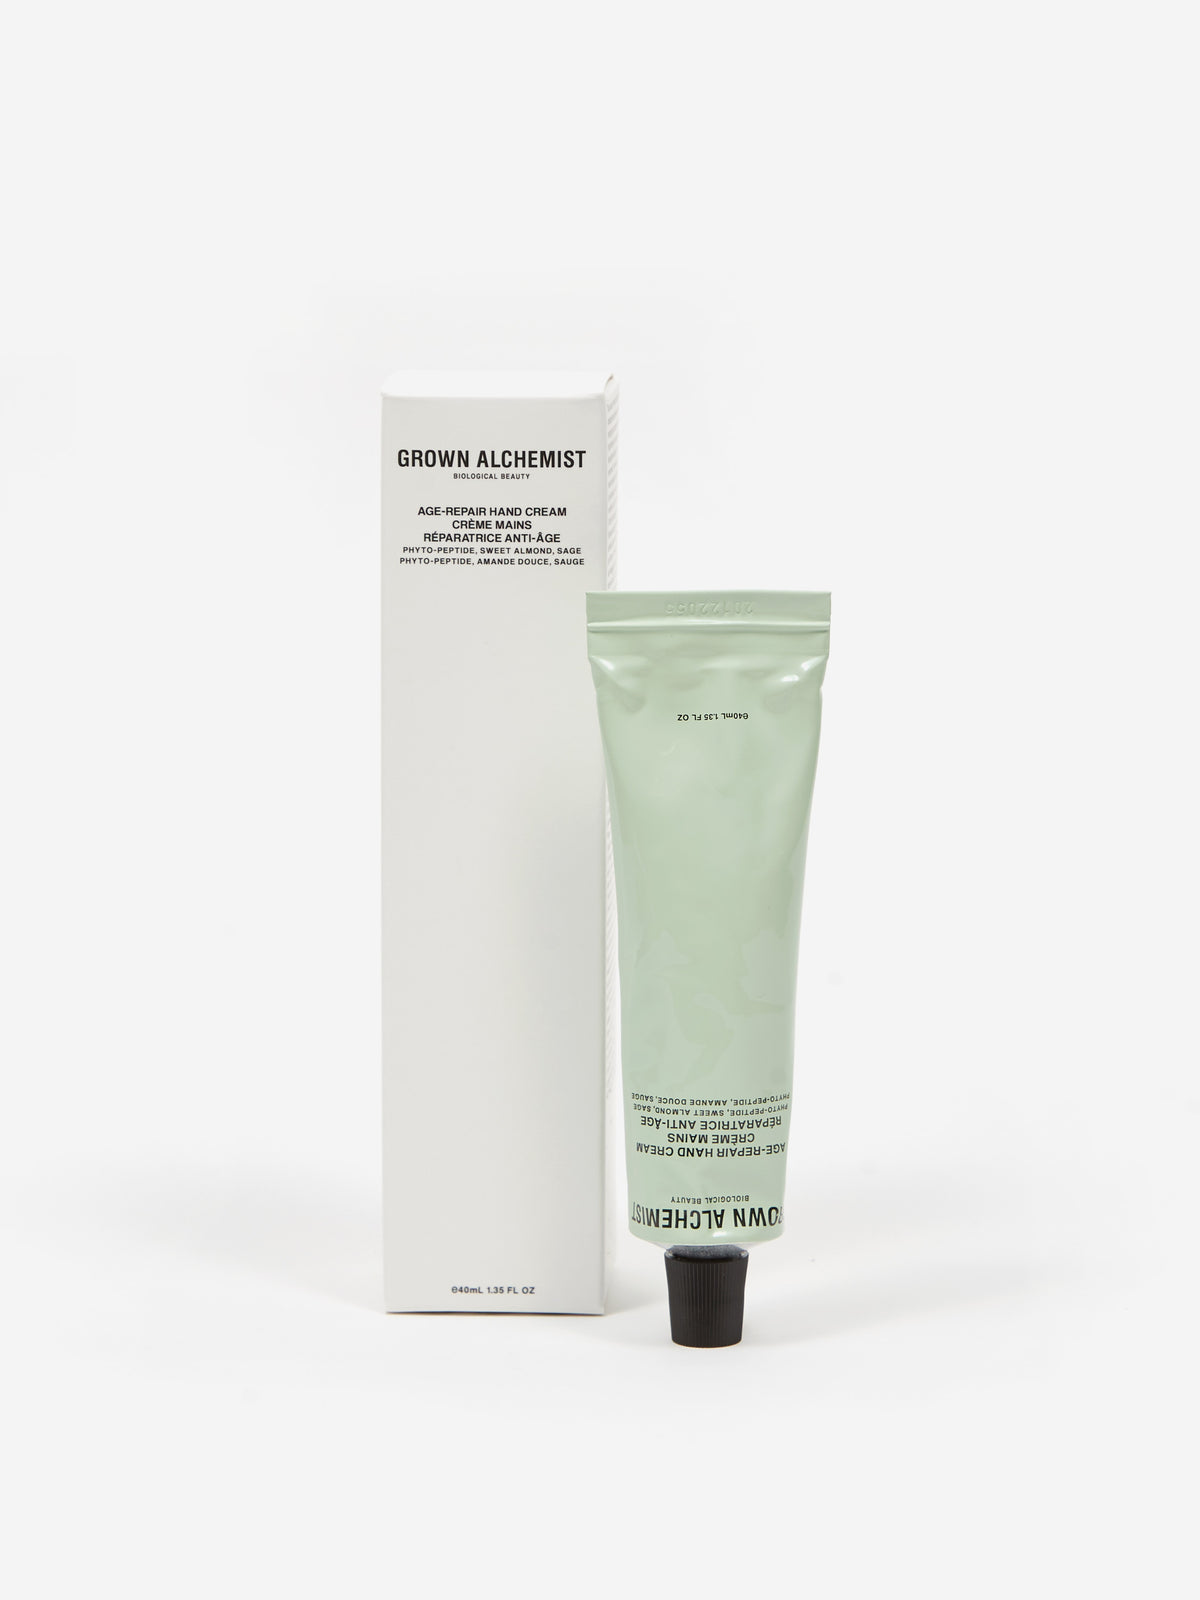 Sweet Alchemist a prices - Sage variety Grown at Peptide, Almond, Phyto- Alchemist Hand 40ml - Age-Repair Cream of affordable Discover Multi Grown